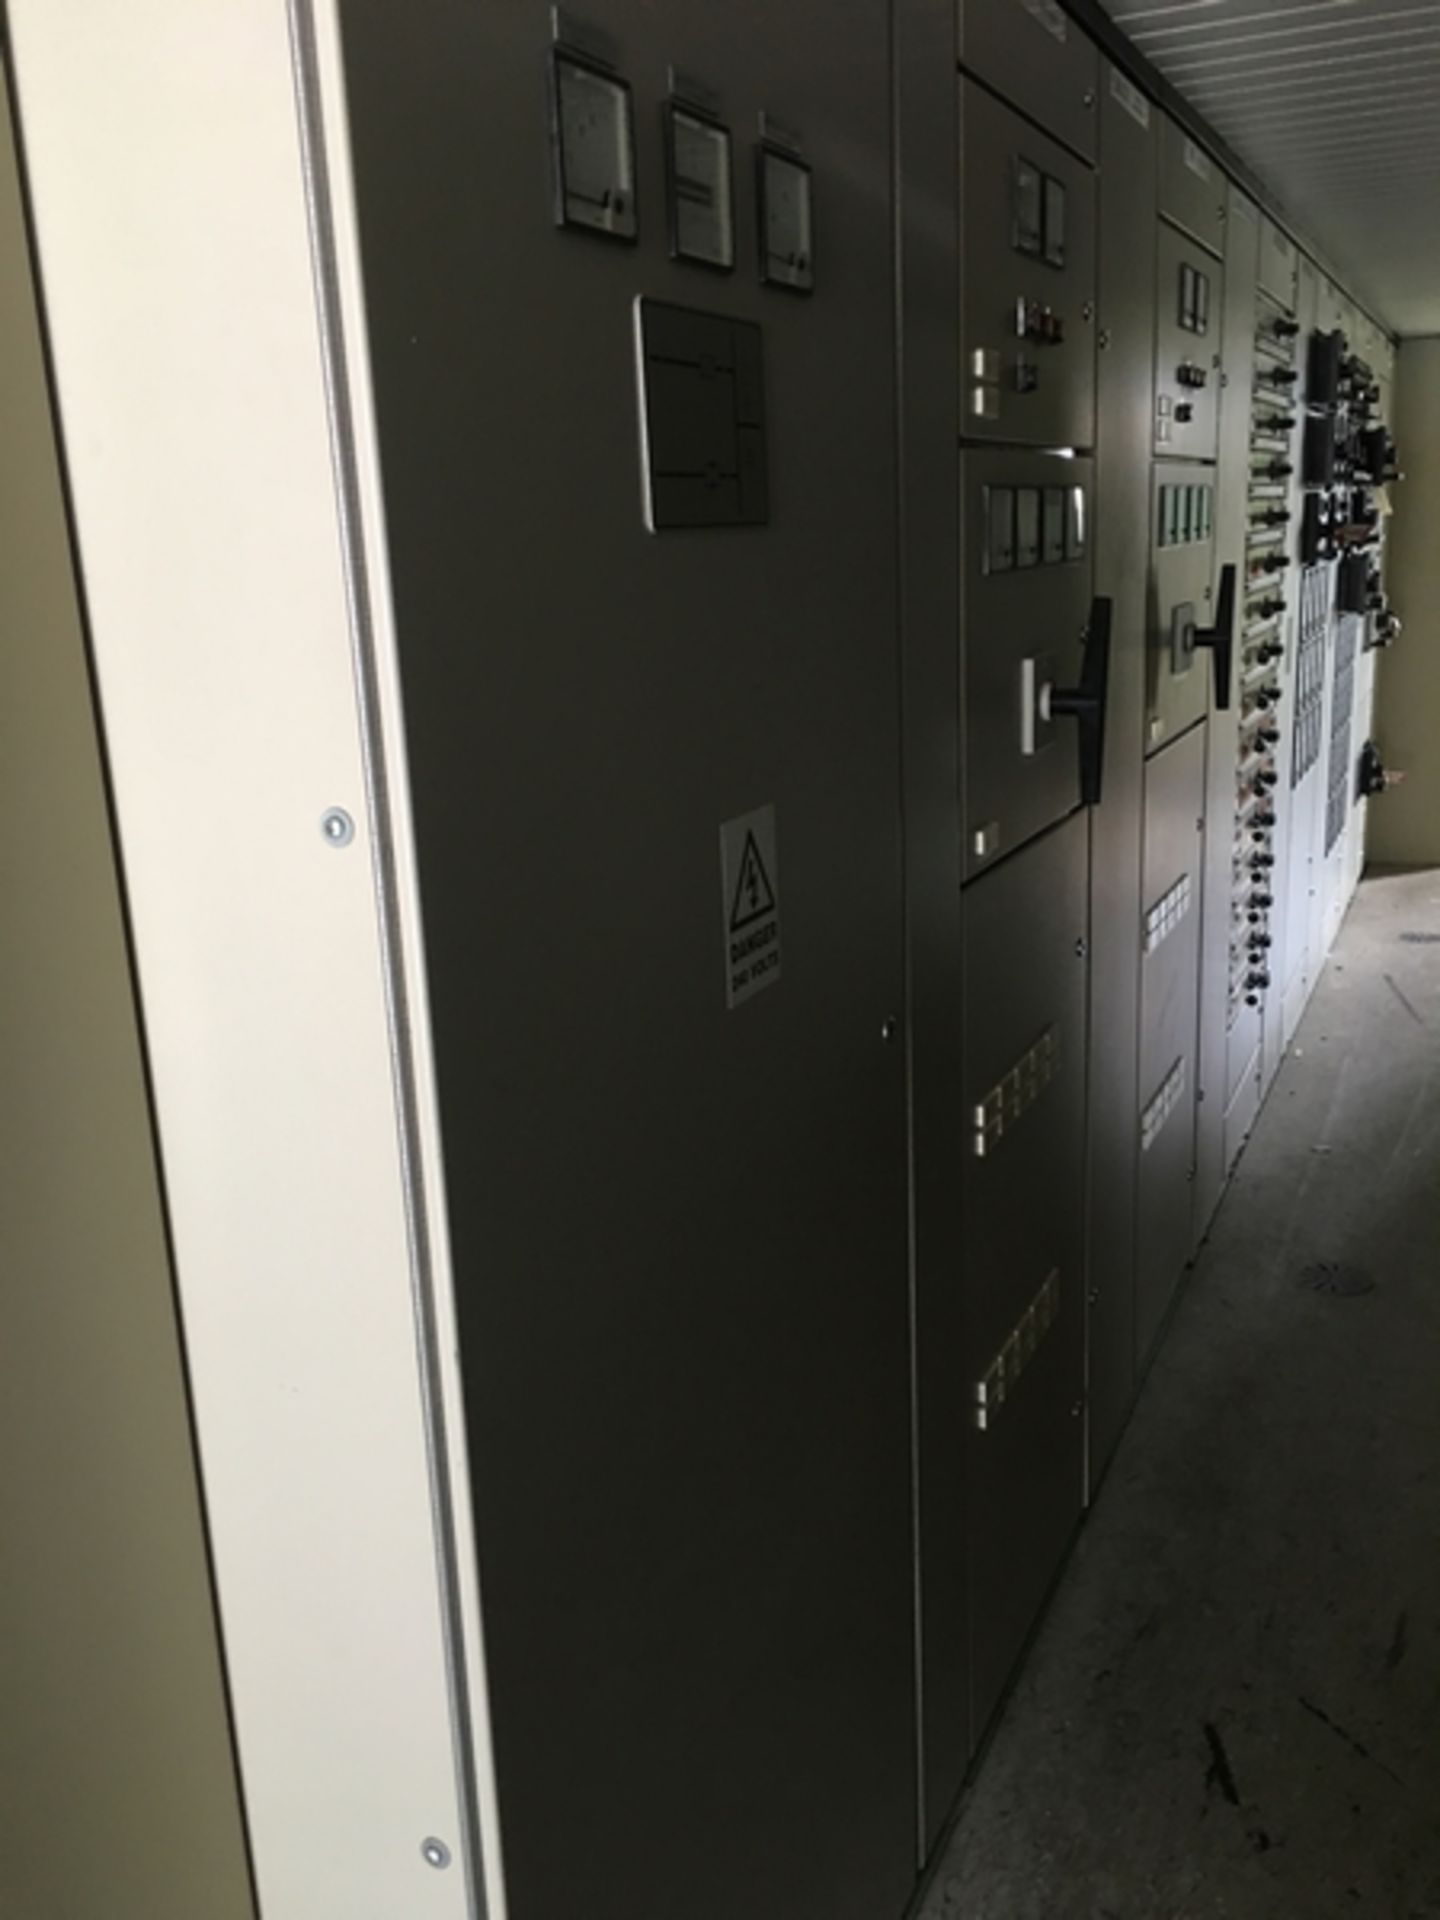 Large Qty Switchgear - From Gas Turbine 3 Control Module Building - Image 6 of 37